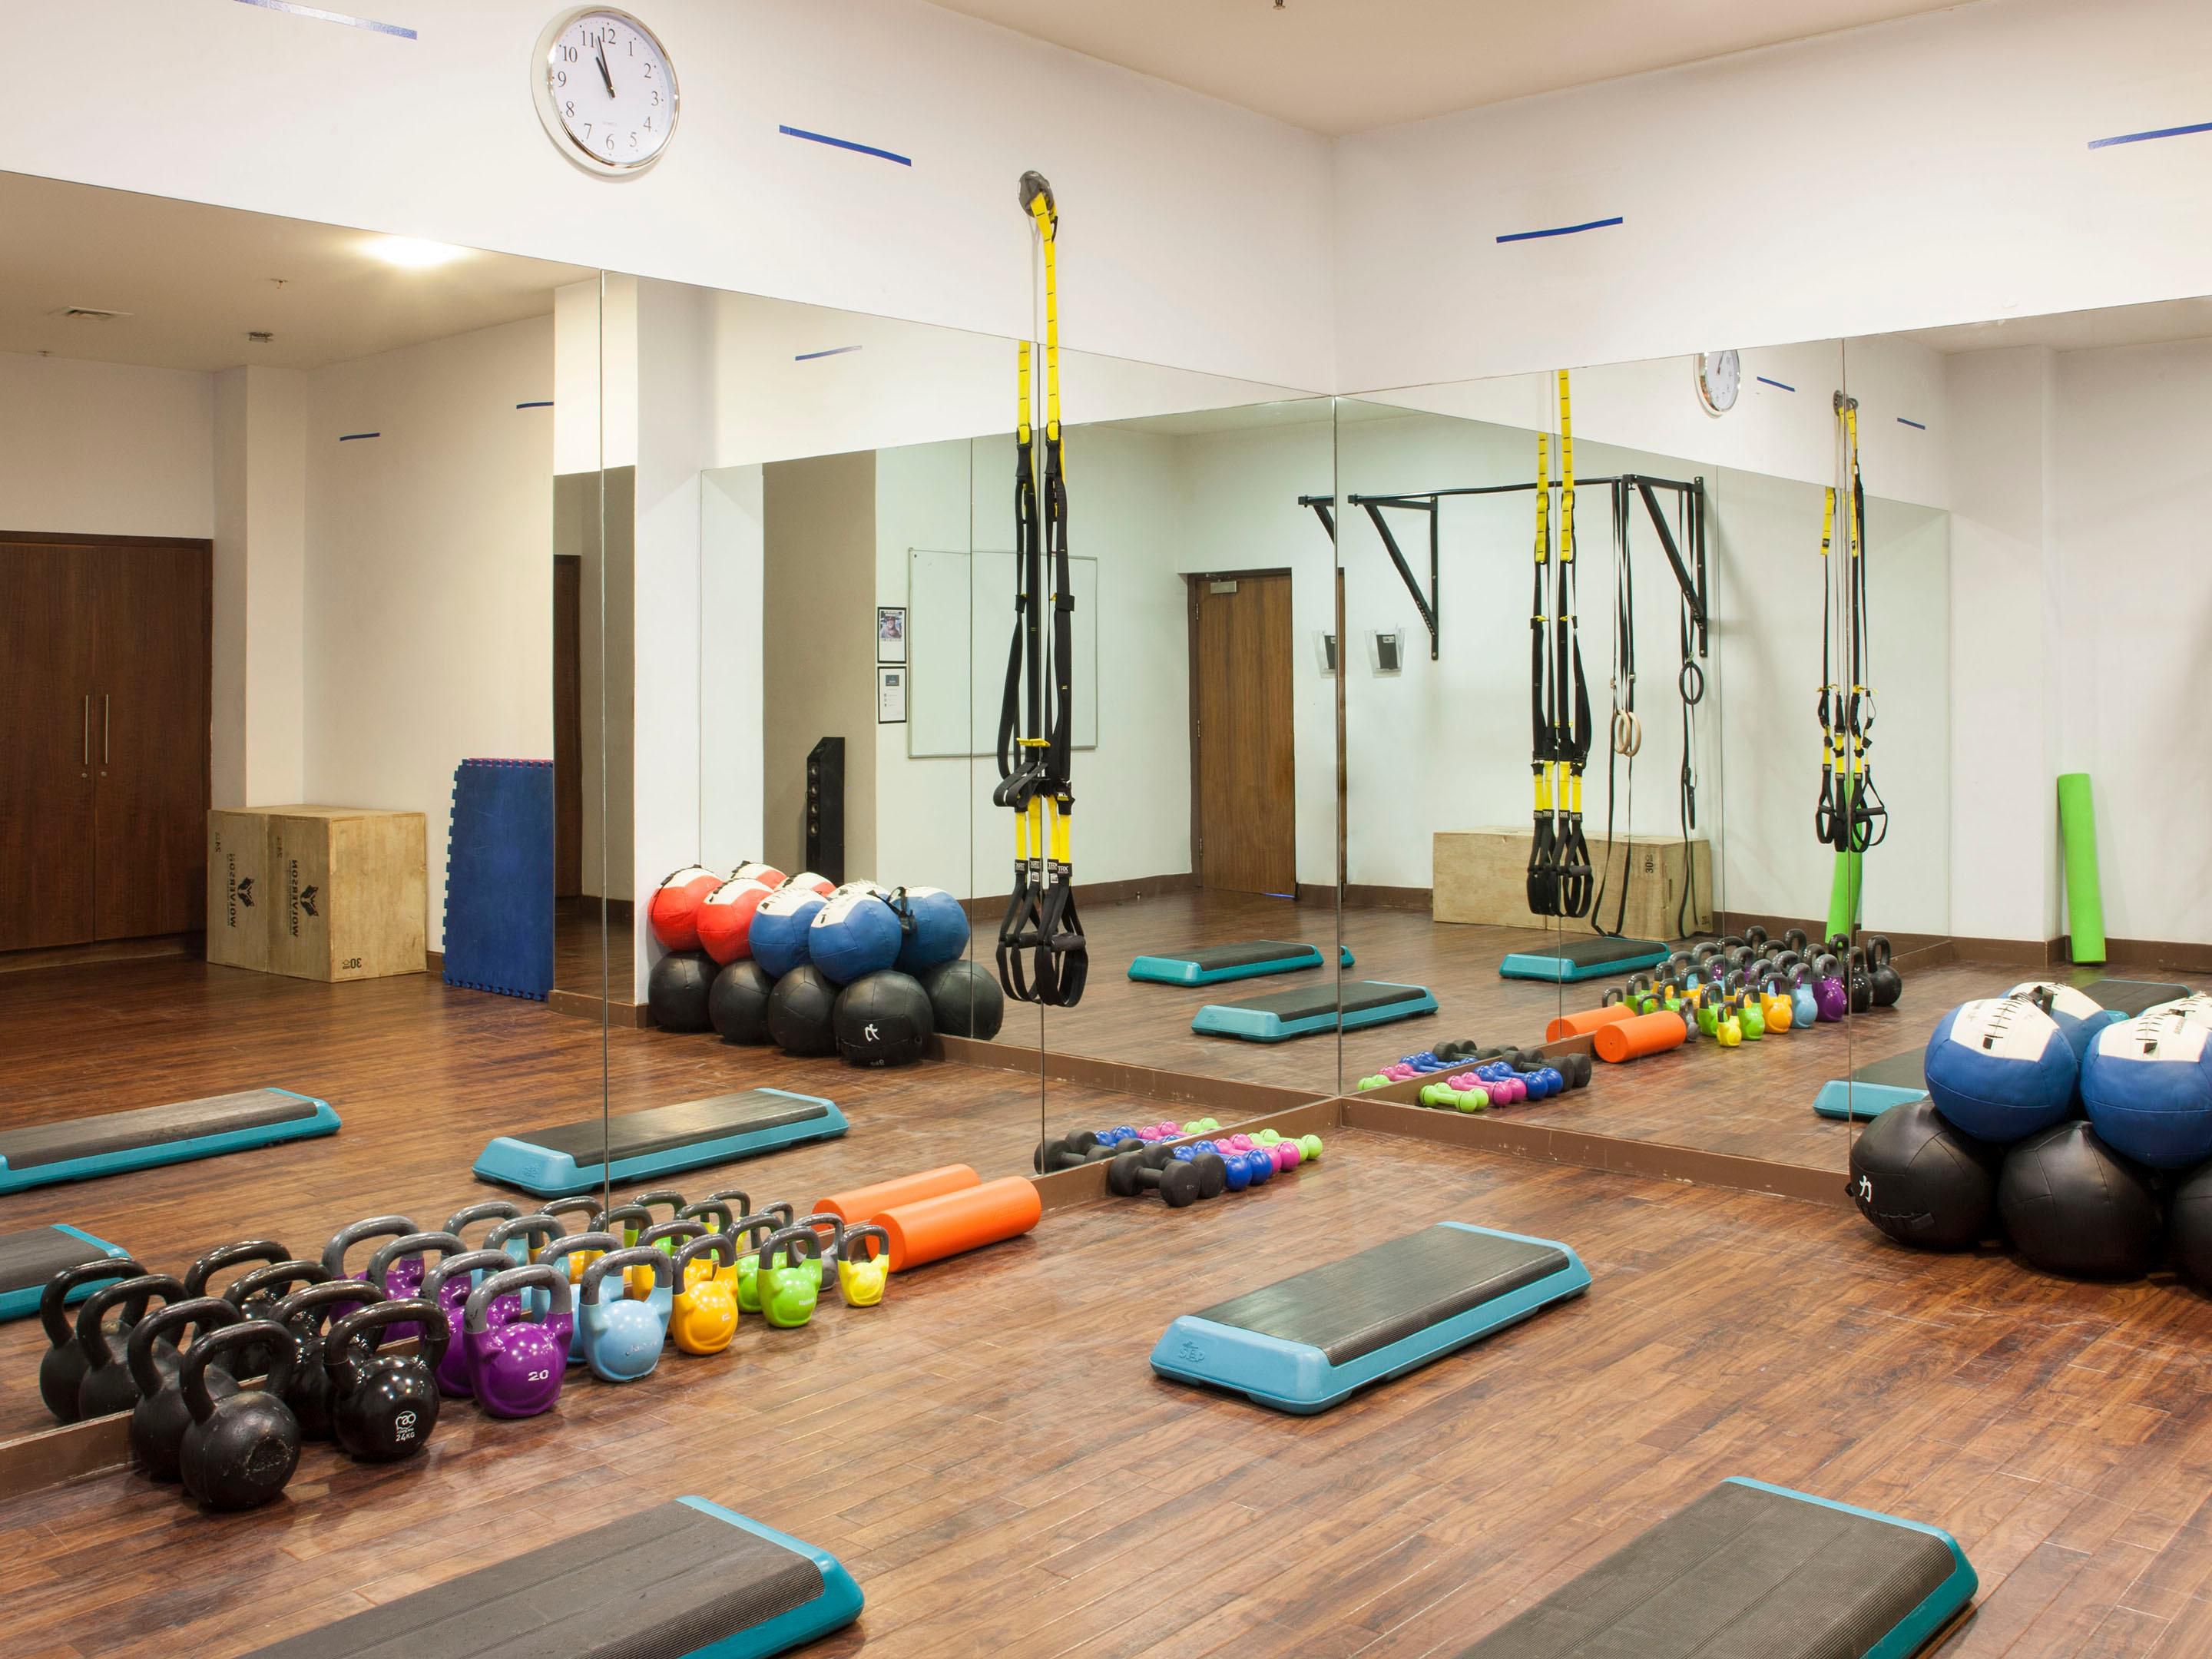 Stay active and motivated in our complimentary Fitness Centre, equipped with the latest cardiovascular and training equipment and free weights. Enjoy a total body workout in our 24/7 gym – the perfect way to stay in shape while exploring London.